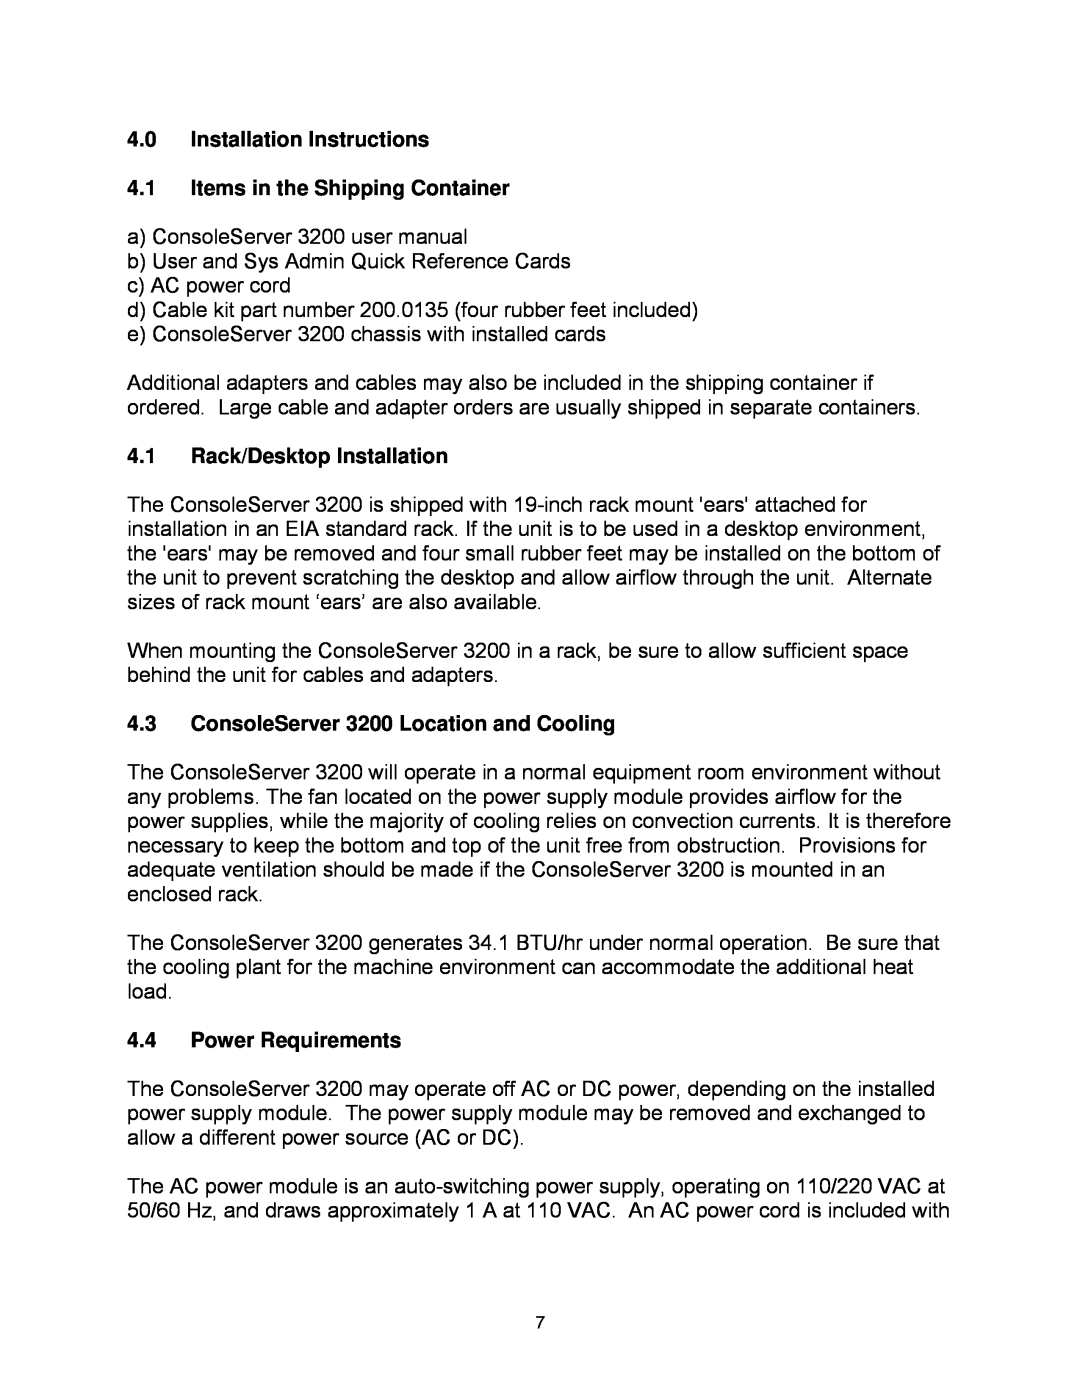 Lightwave Communications 3200 Installation Instructions 4.1 Items in the Shipping Container, Rack/Desktop Installation 